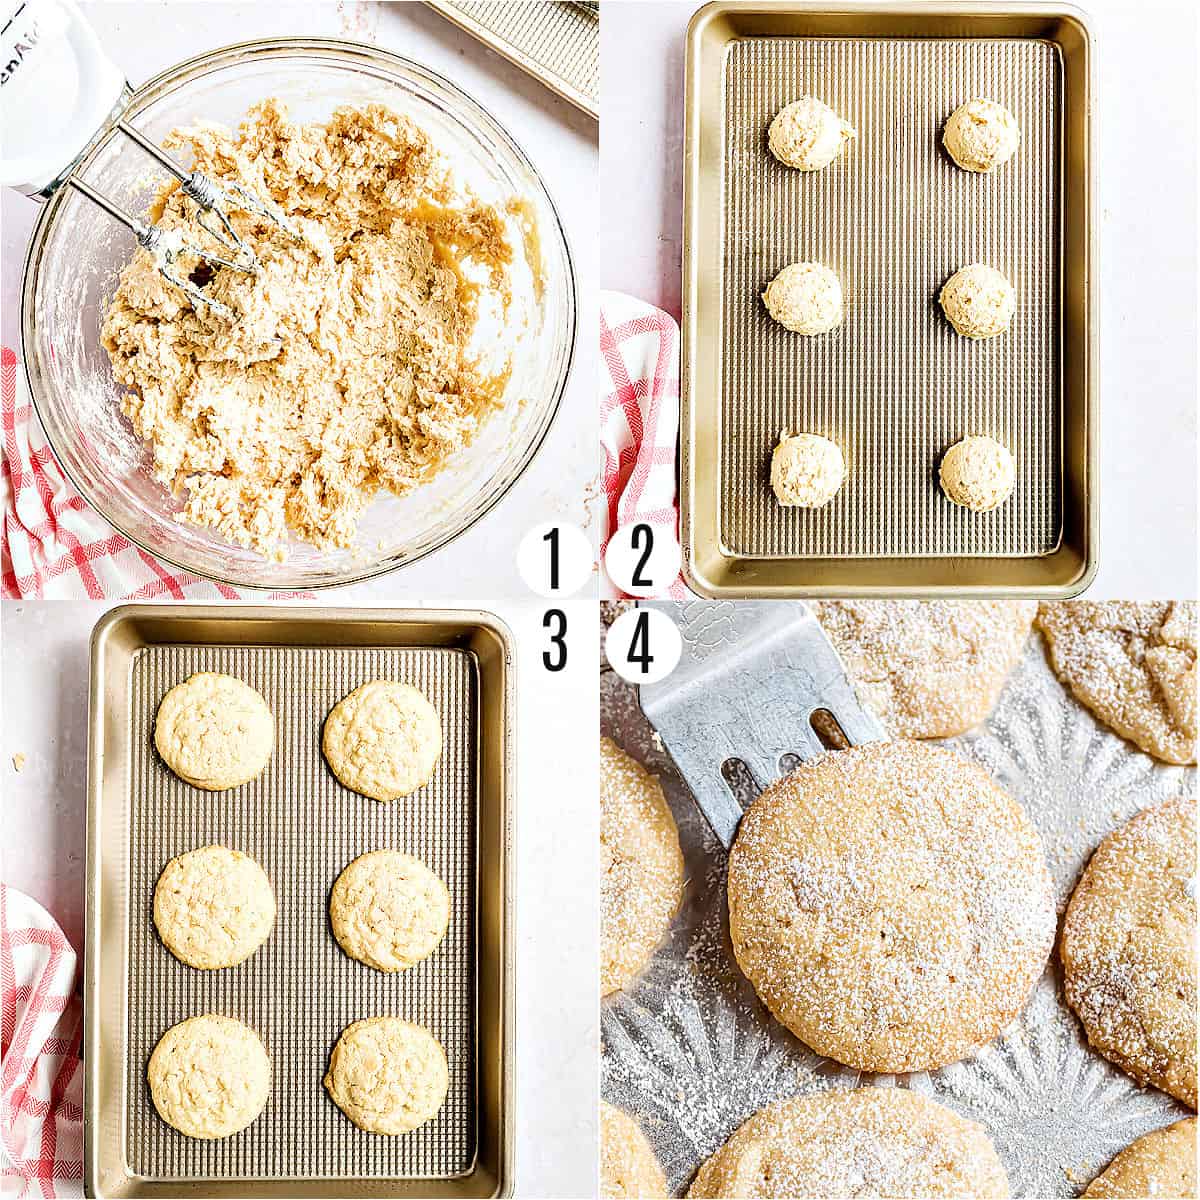 Step by step photos showing how to make potato chip cookies.